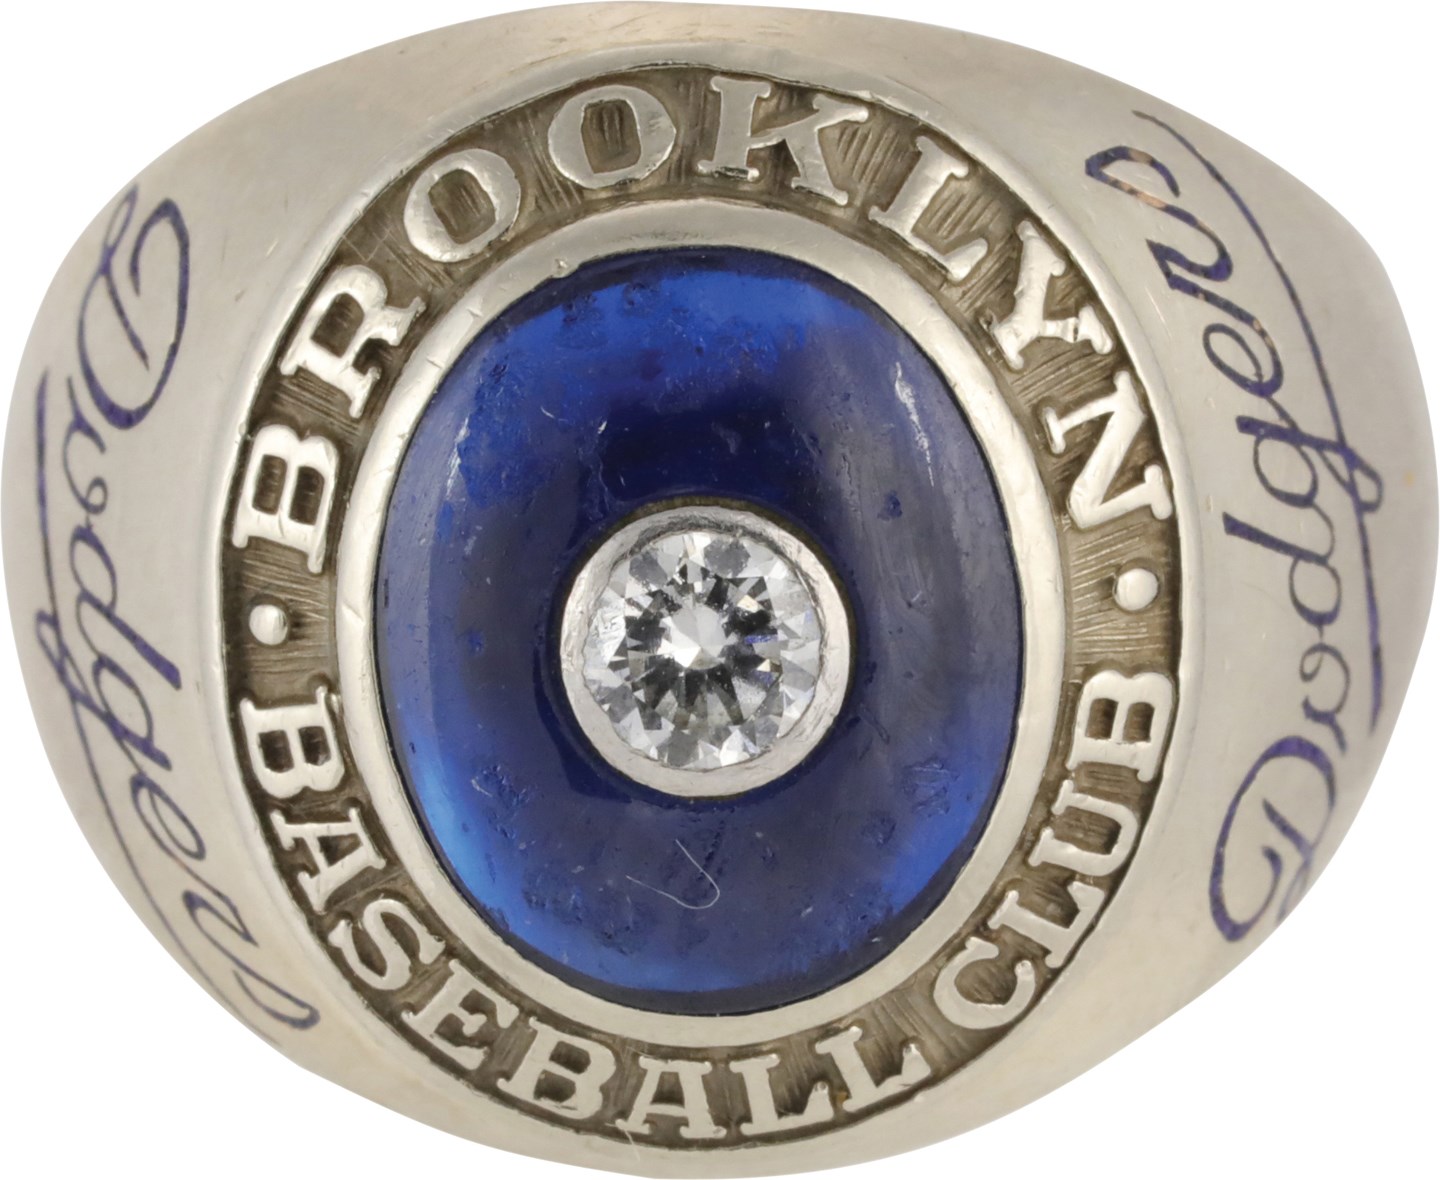 - Circa 1960s Walt Alston Brooklyn Dodgers Team Issued 1948 Replacement Ring